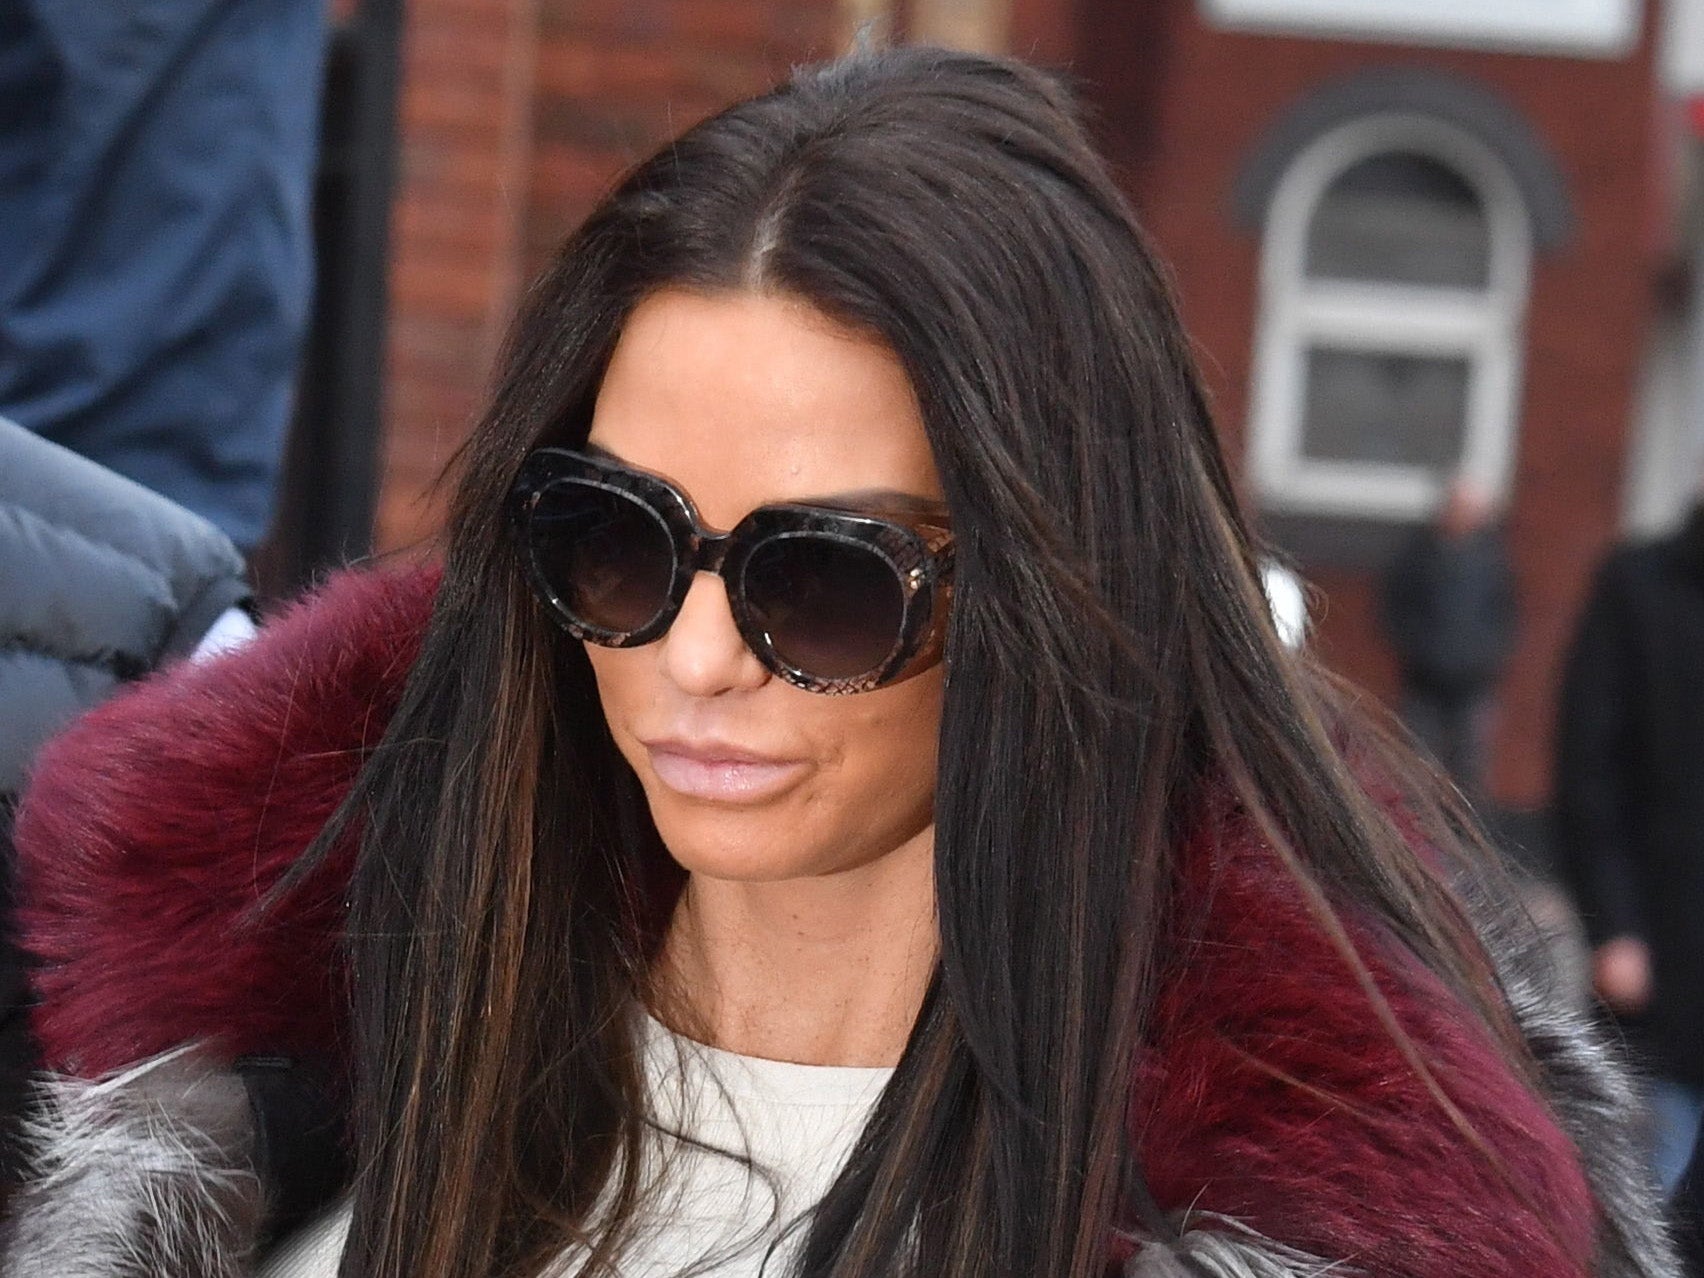 Katie Price is accused of being drunk in charge of a vehicle on 10 October last year